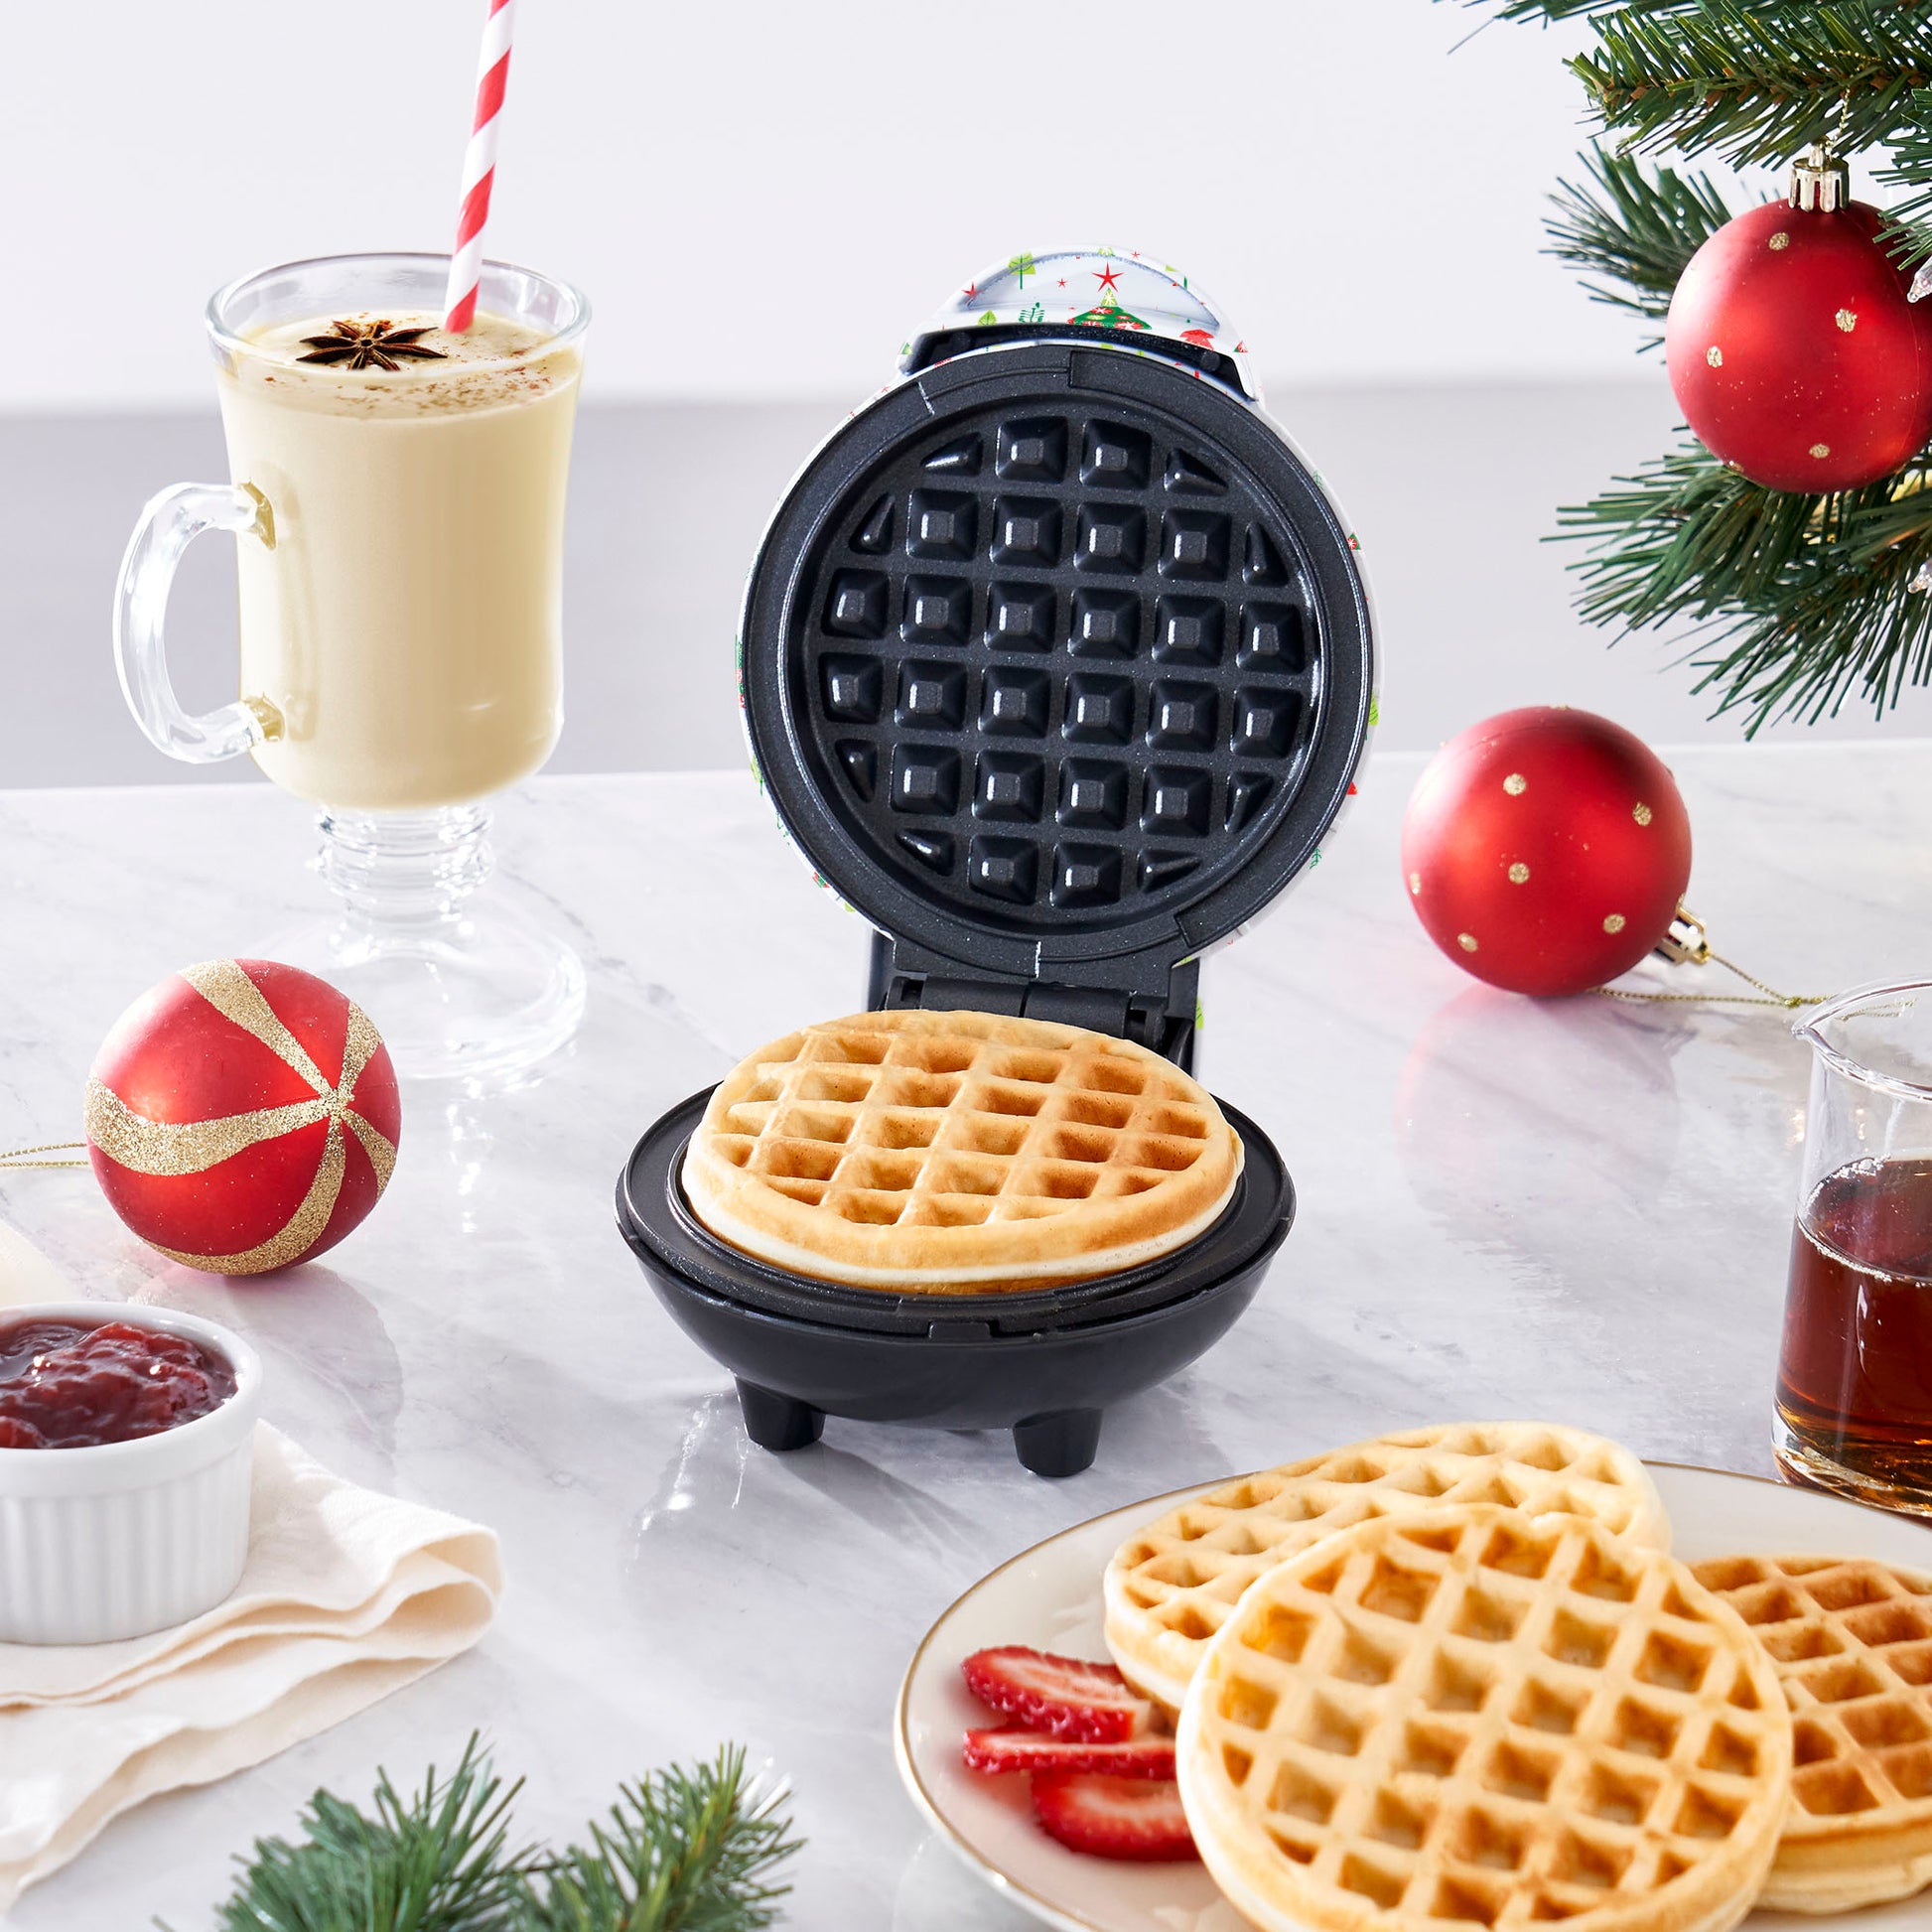 DASH MINI MAKERS SET OF 3 GRIDDLE WAFFLE GRILL W/GIFT BOXES AND RECIPES